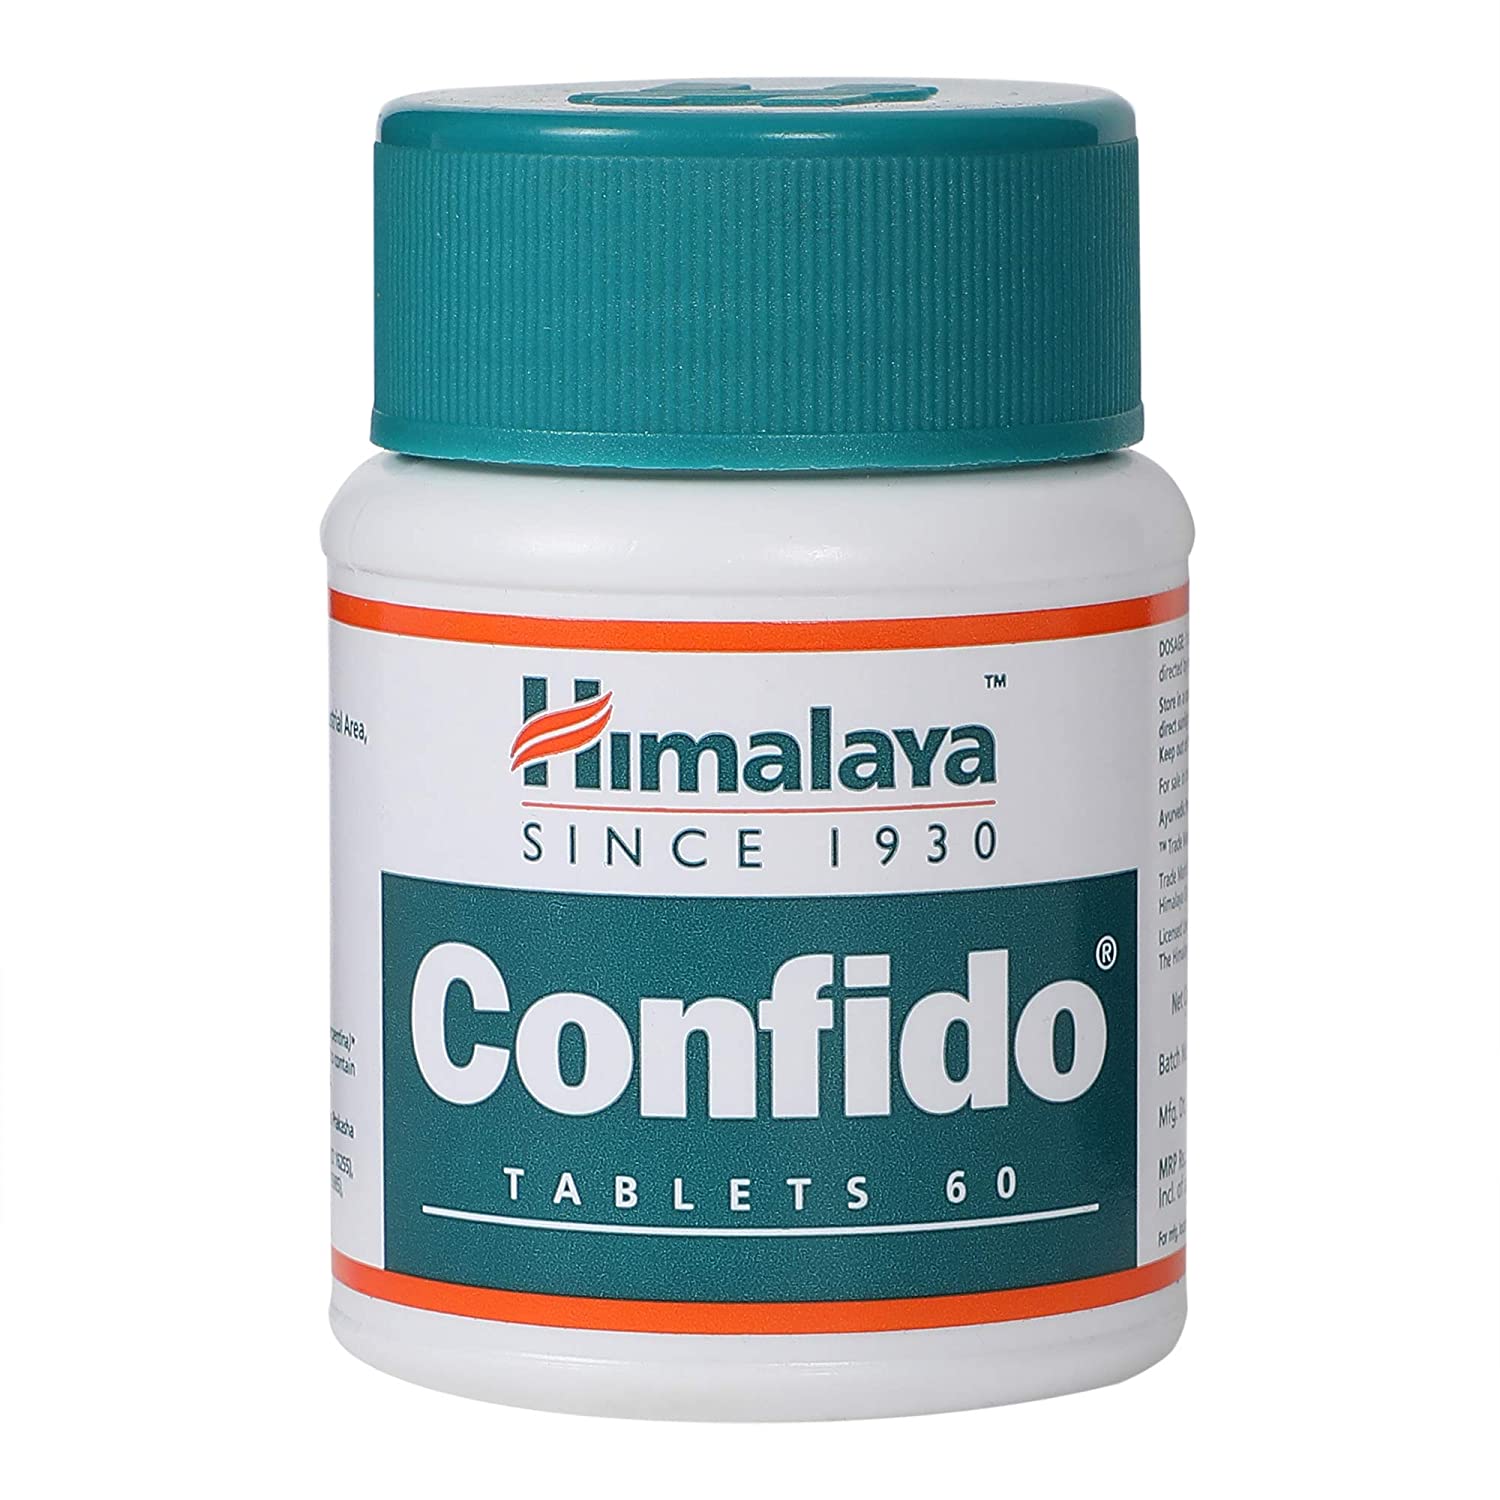 Himalaya Confido Tablets for Confidence You Need - 60 Counts